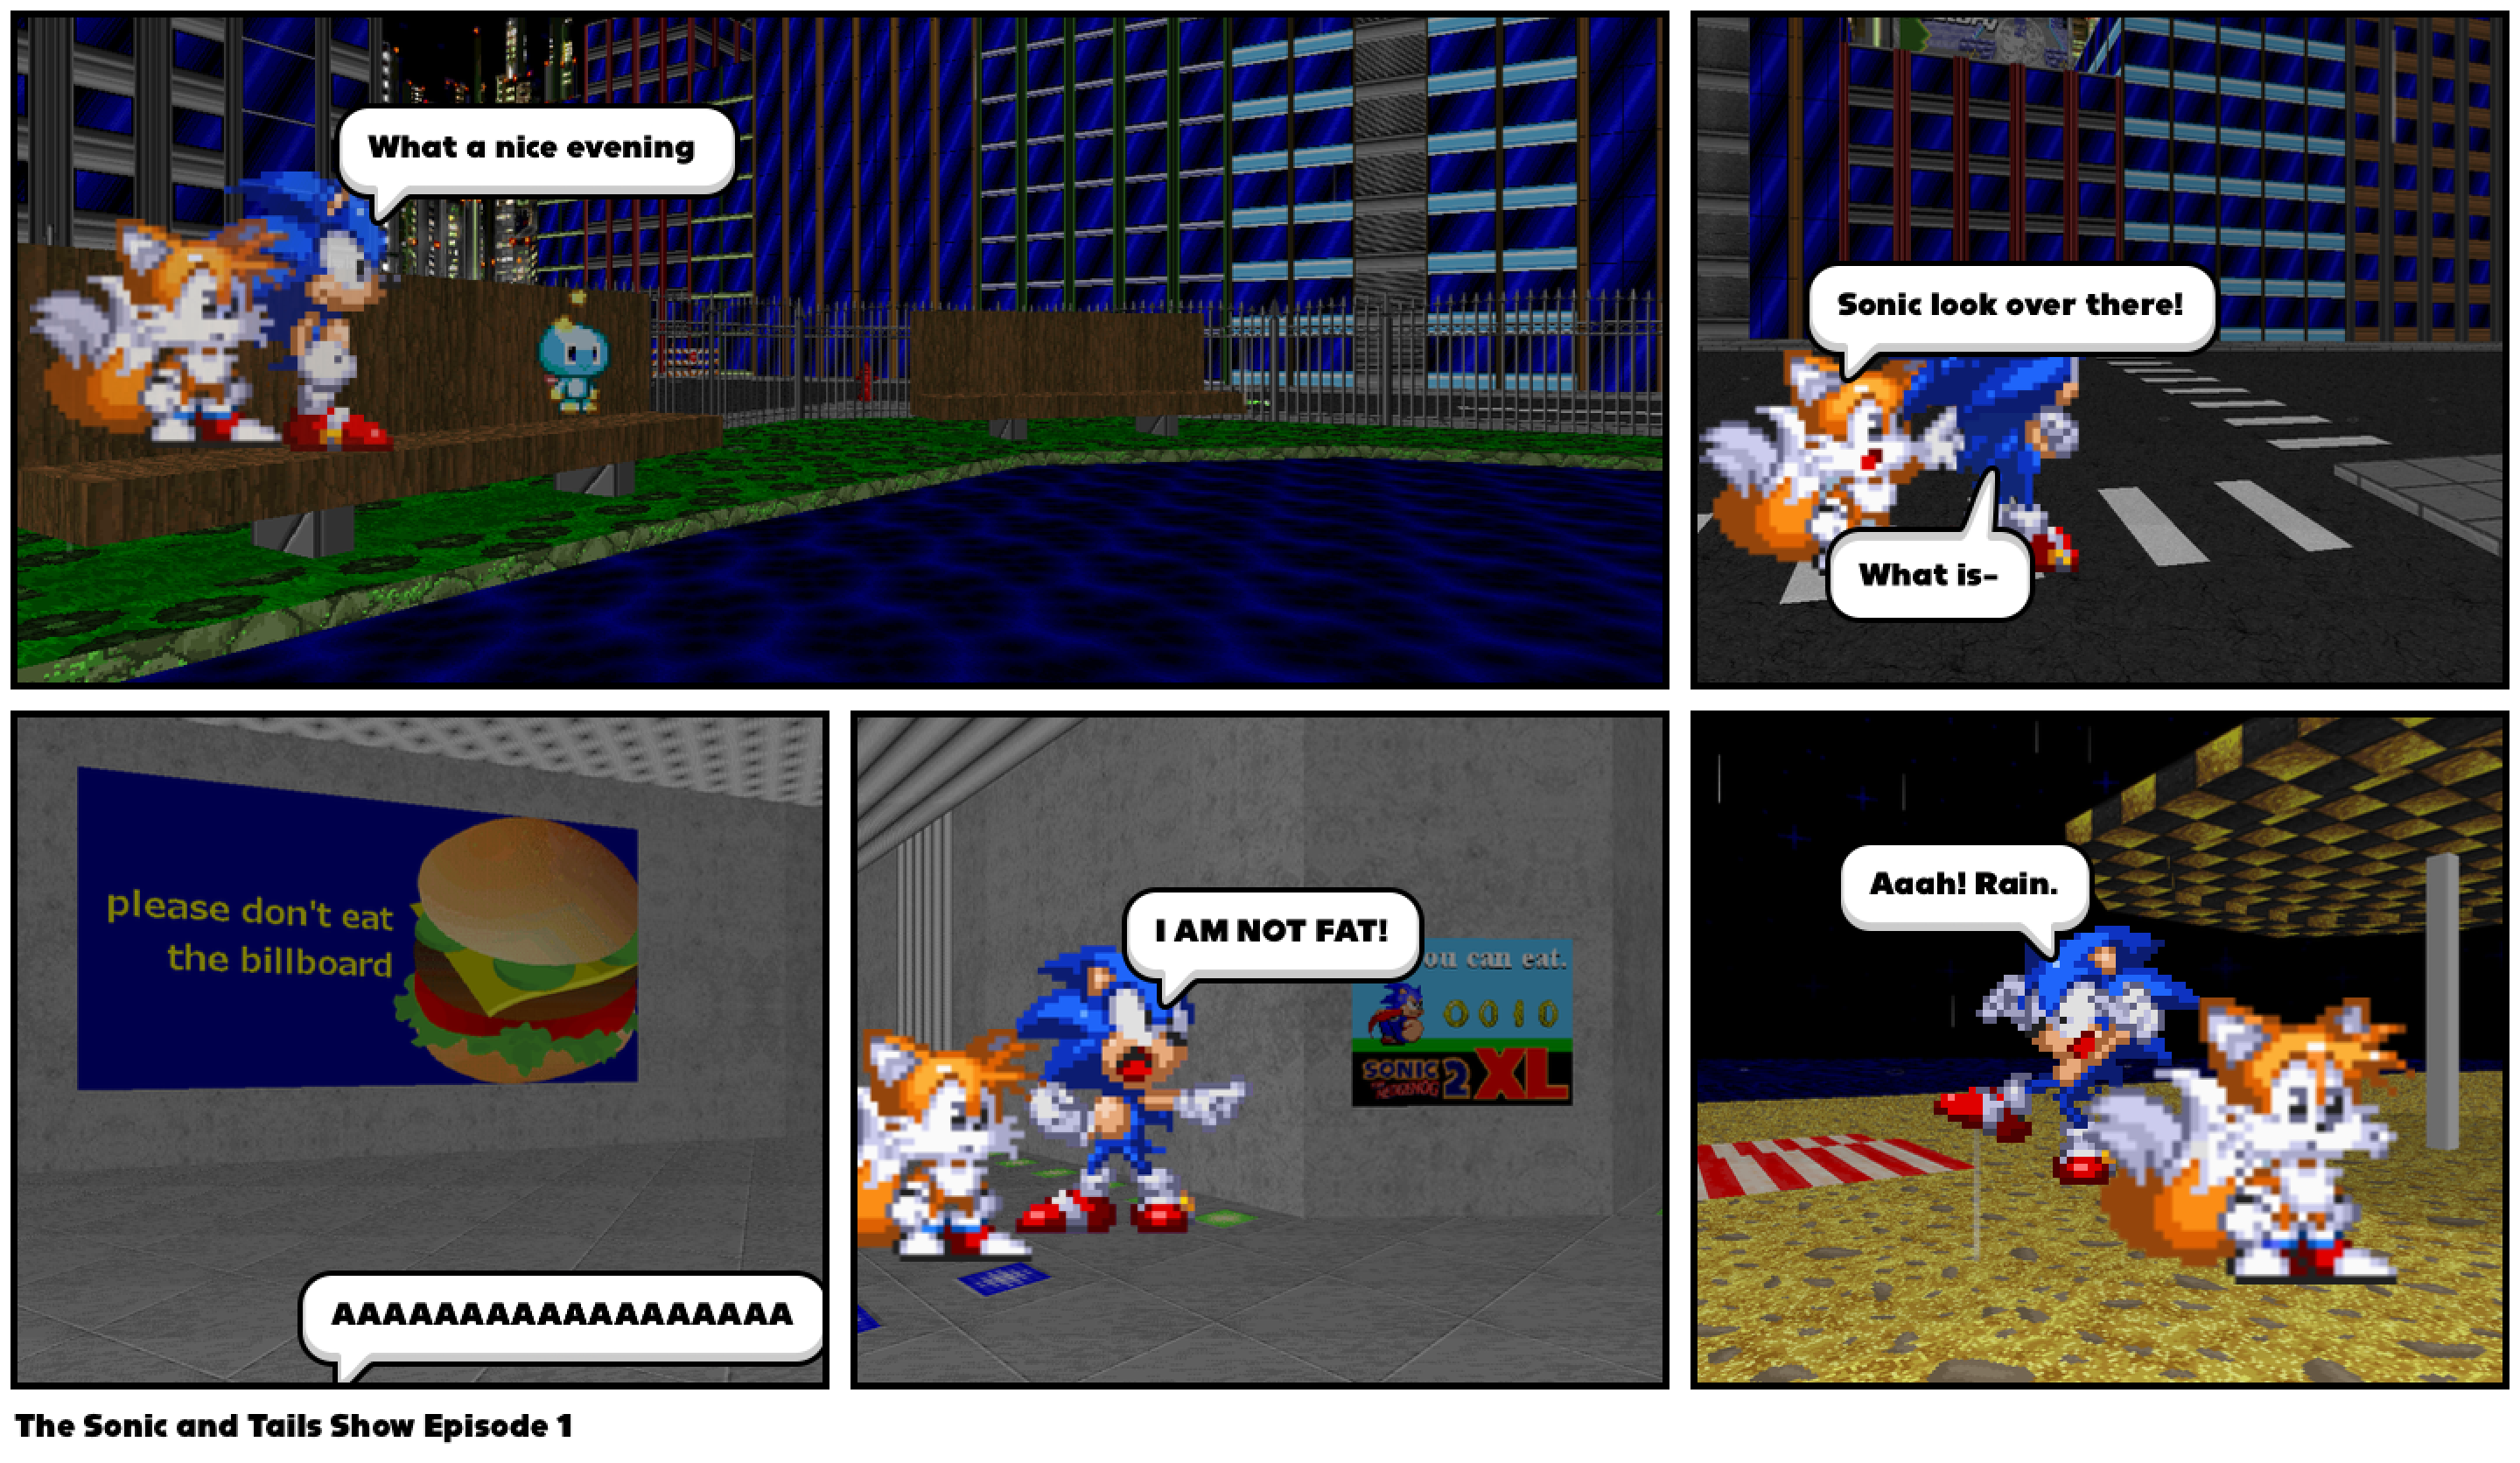 The Sonic and Tails Show Episode 1